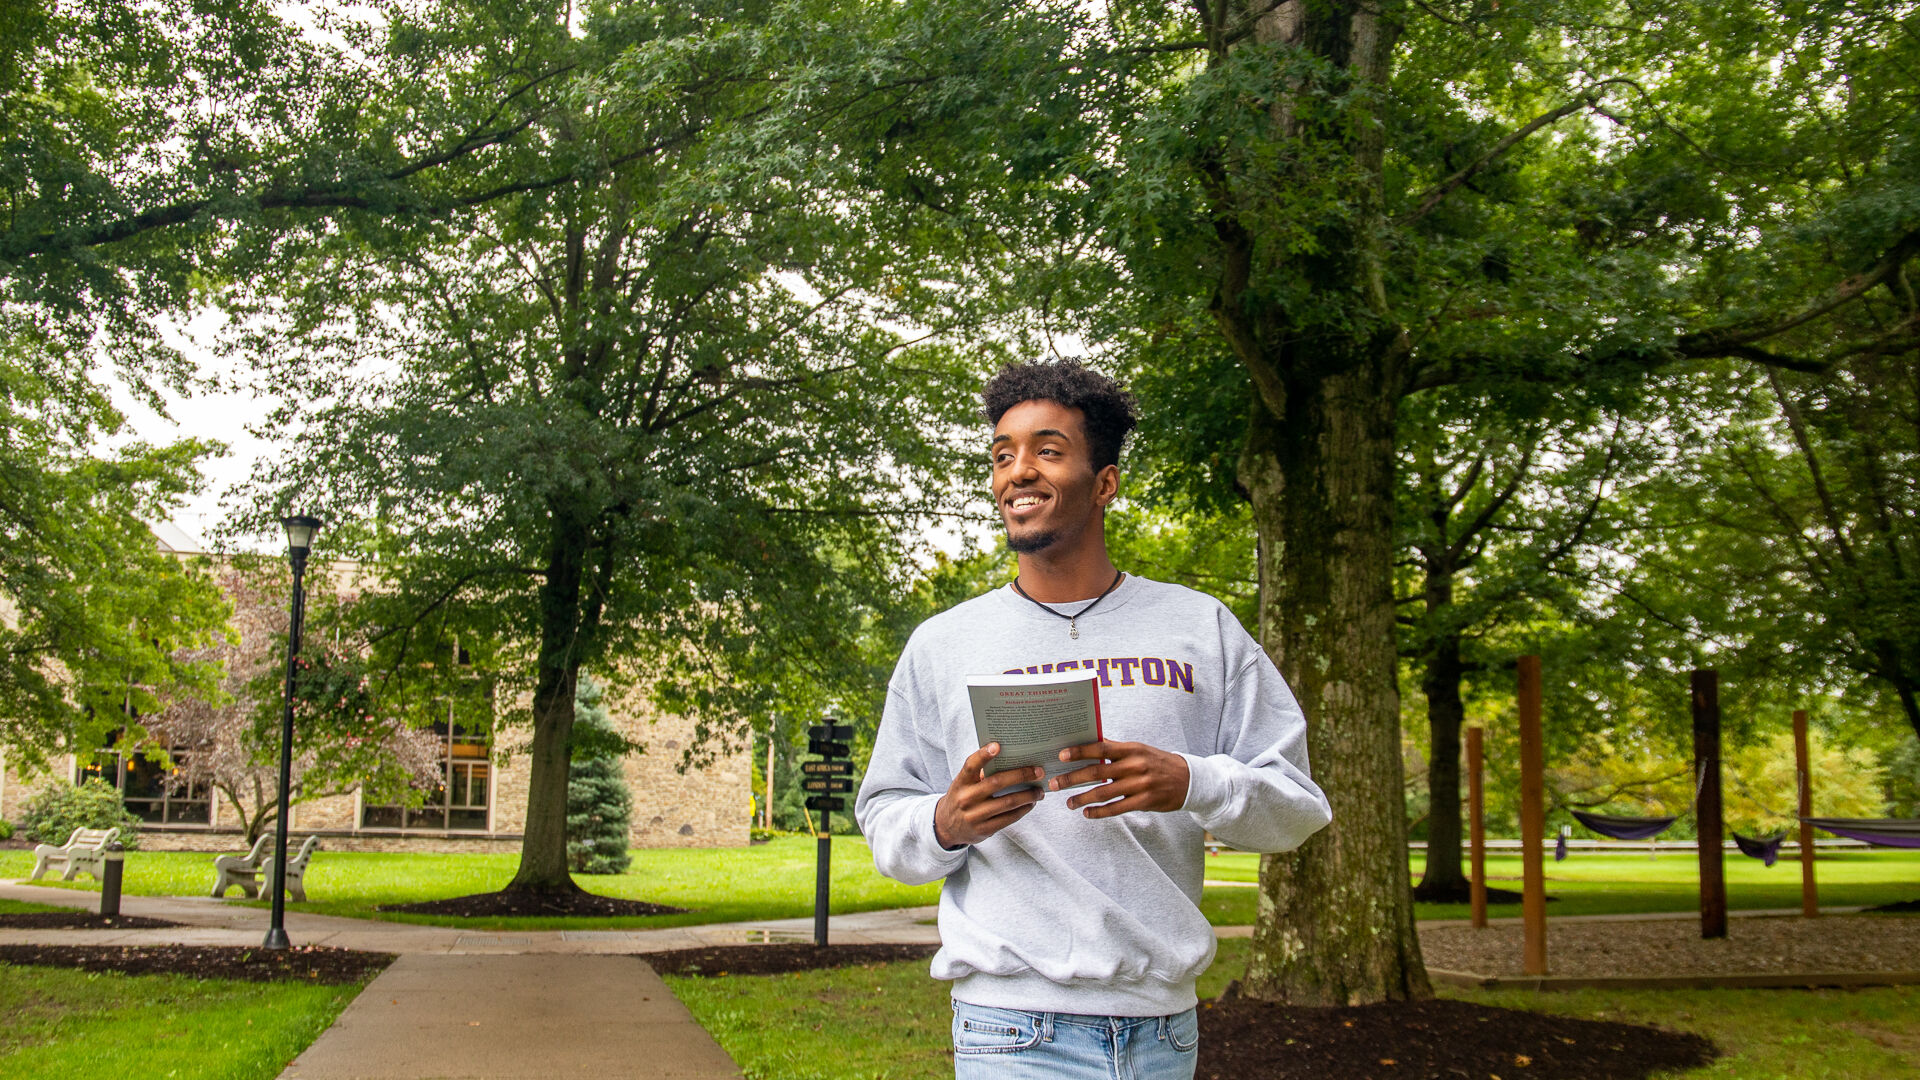 Houghton student walking on campus holding book and wearing Houghton sweatshirt.